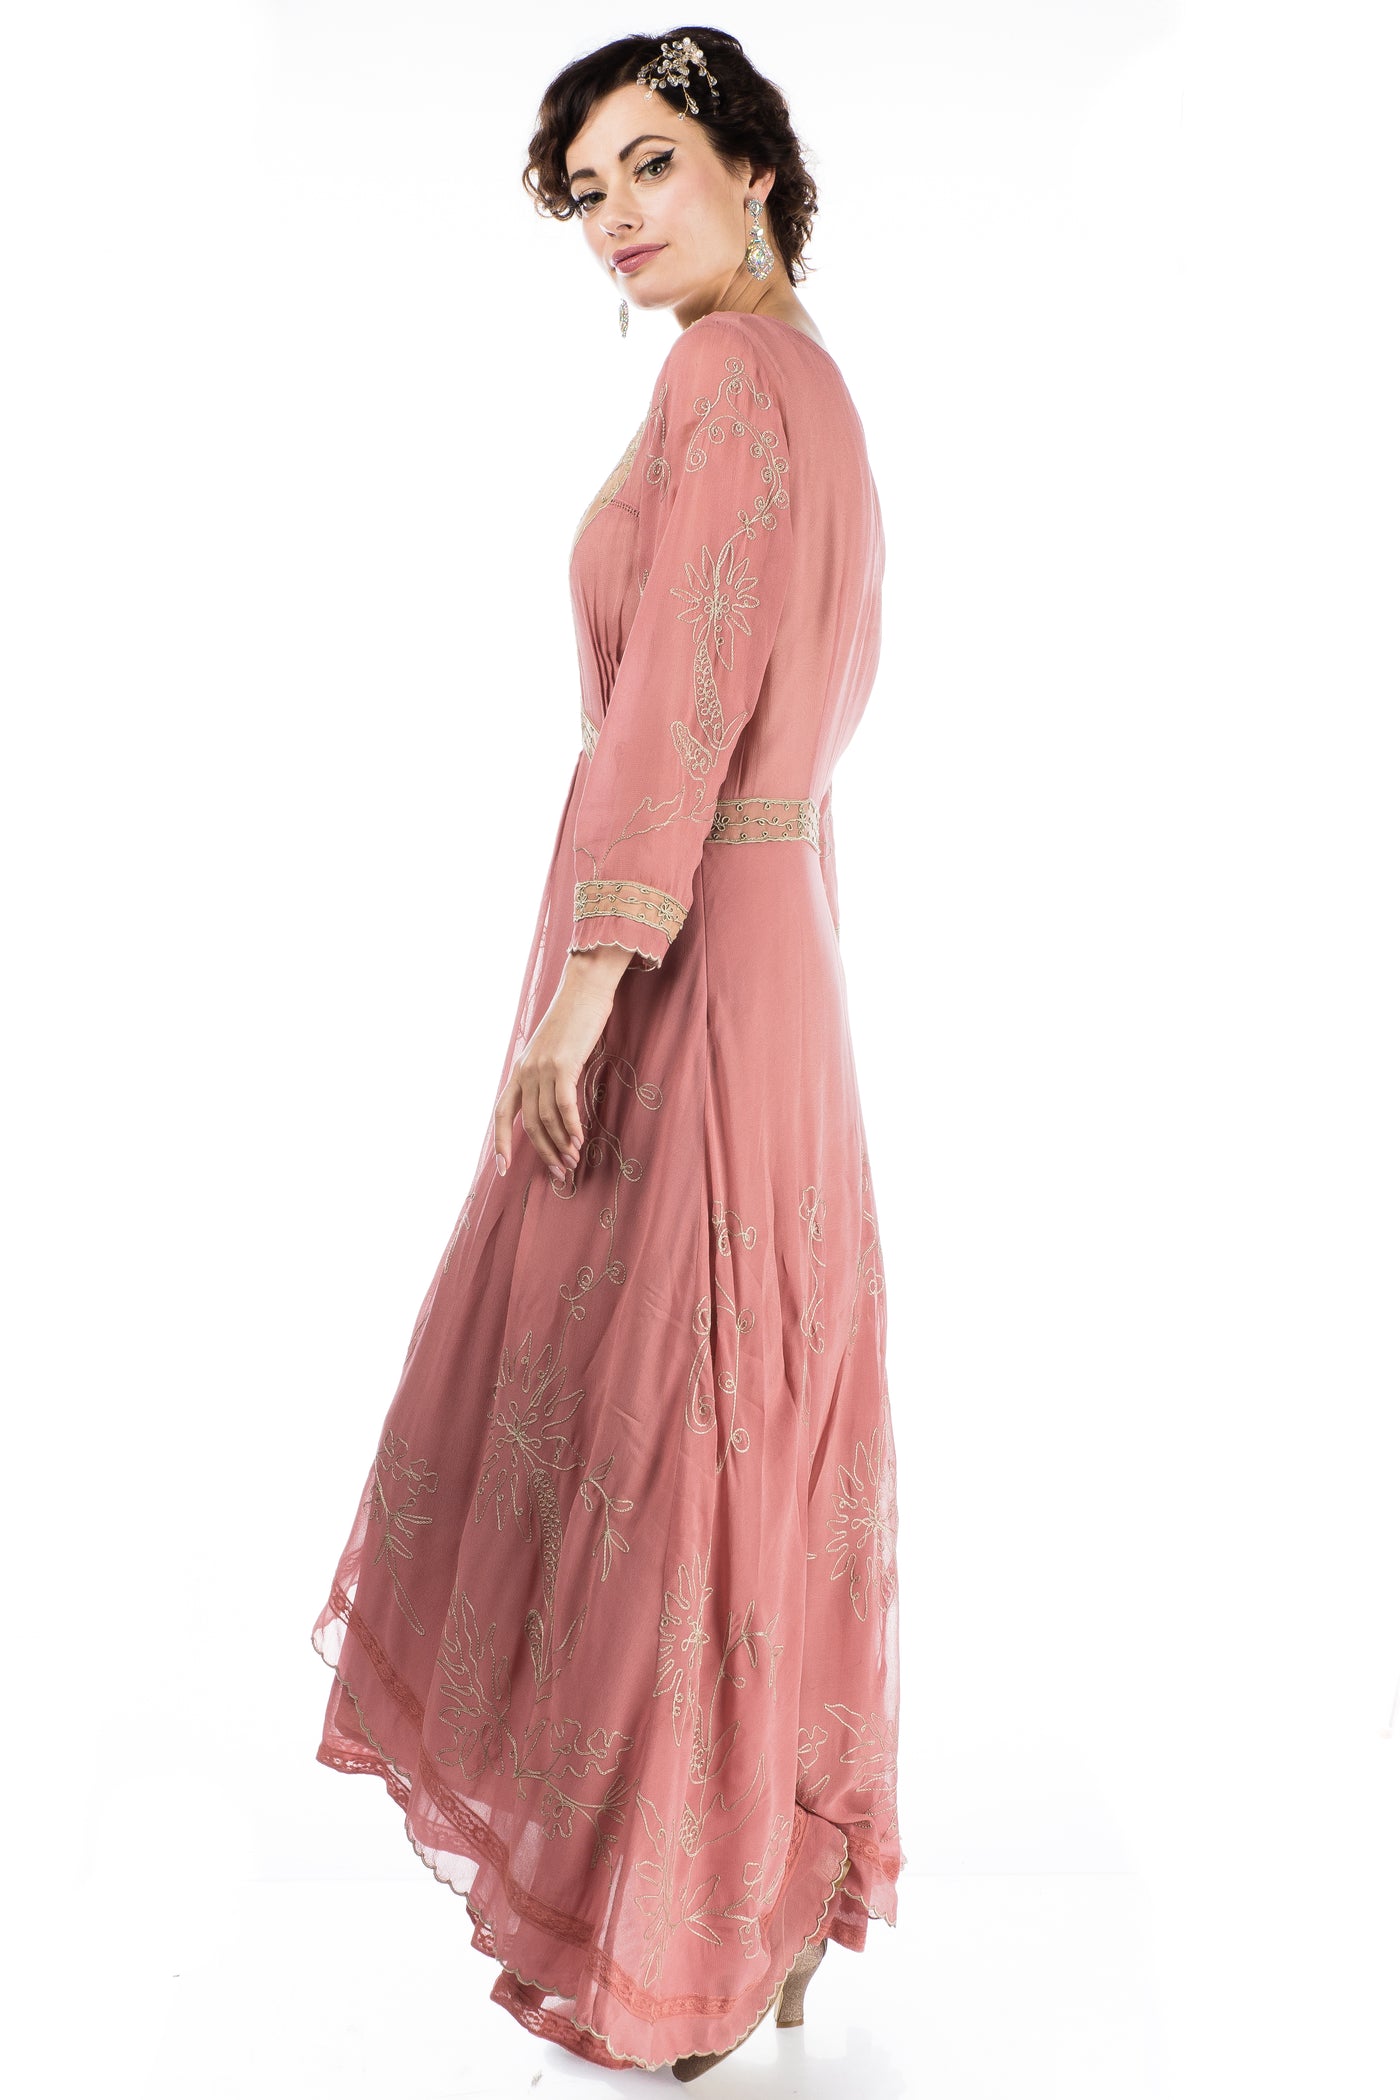     Edith-Downton-Abbey-Inspired-Dress-in-Pink-Beige-by-Nataya-side